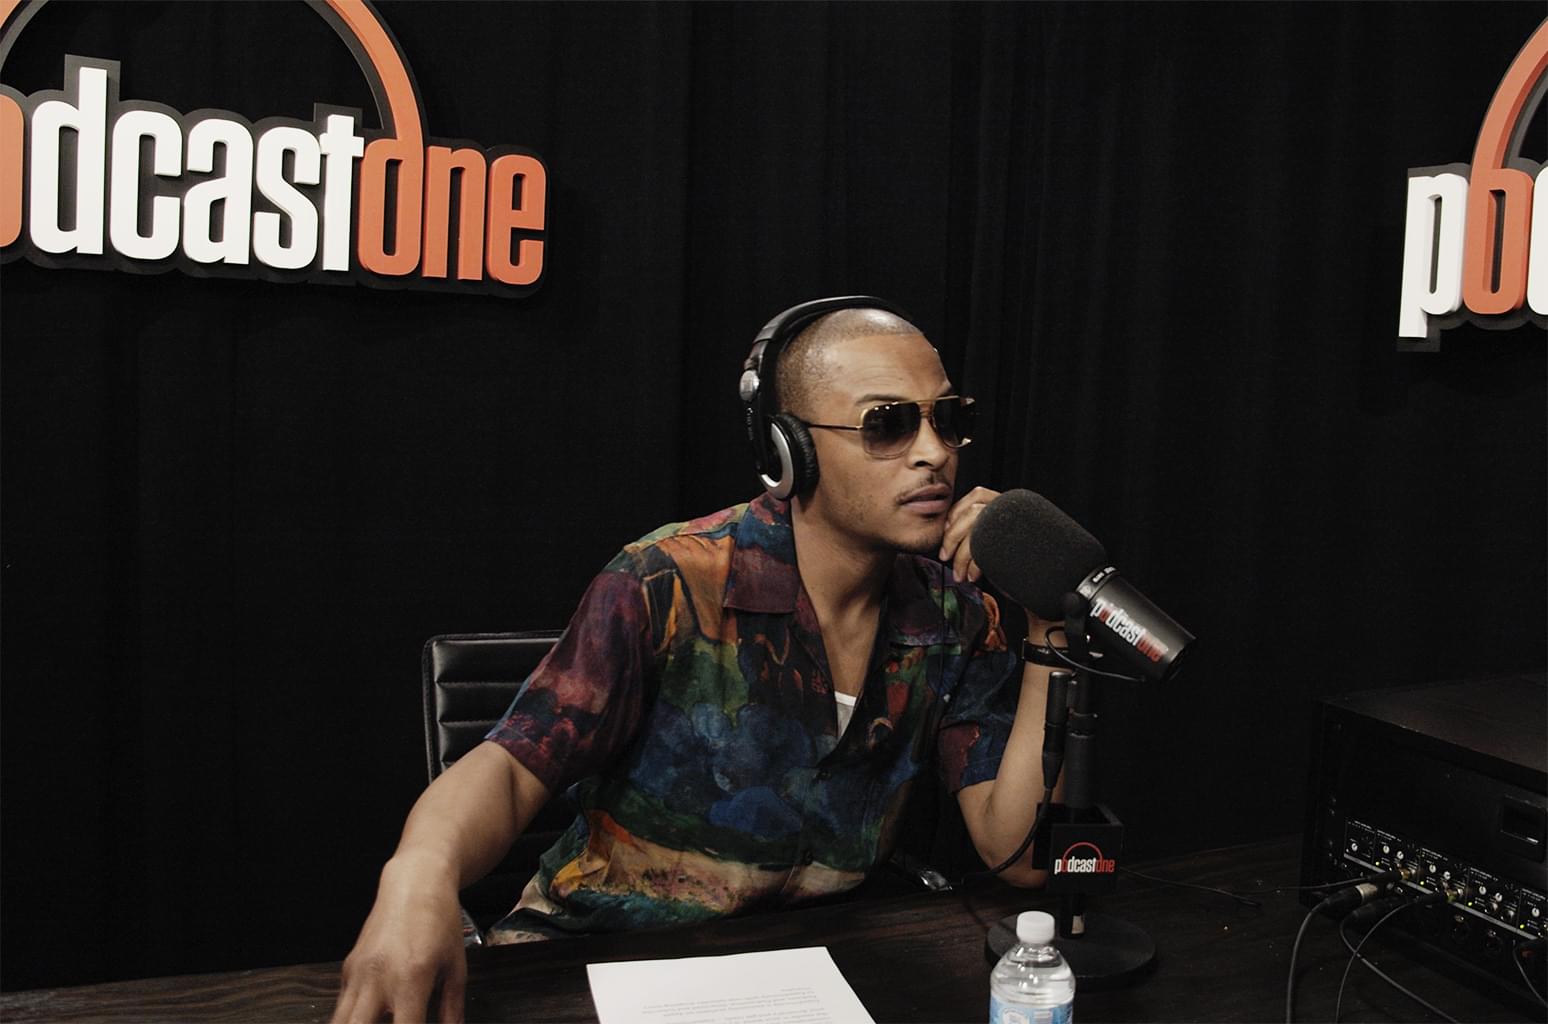 T.I.’s “ExpediTIously” Podcast Becomes #1 After Just One Episode